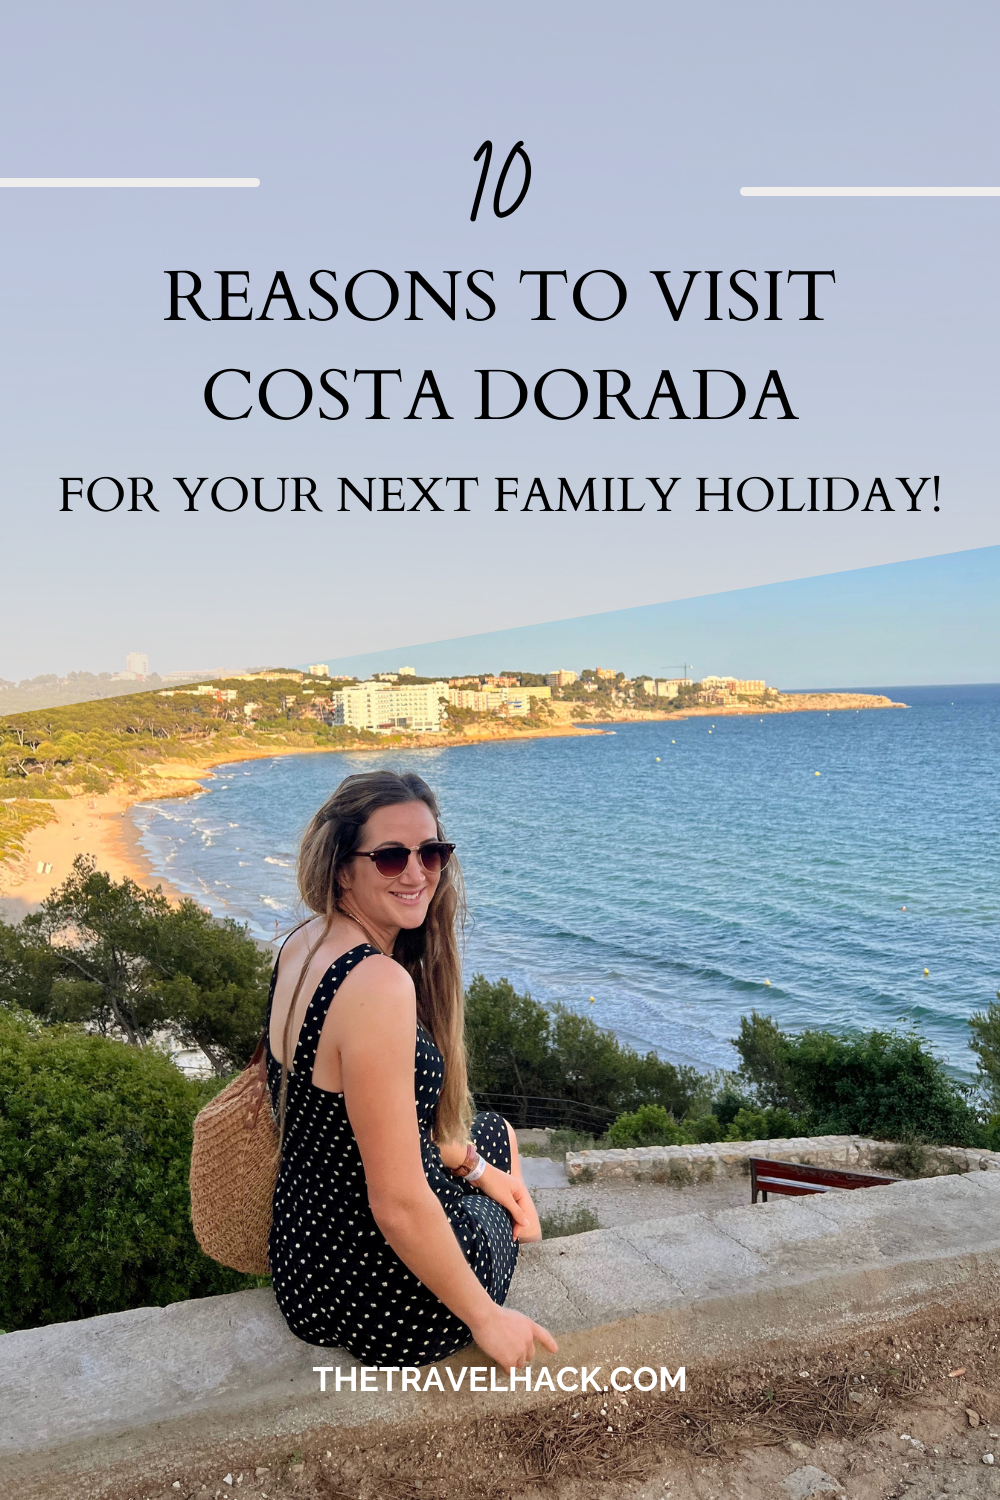 10 reasons you should visit Costa Dorada for your next family holiday